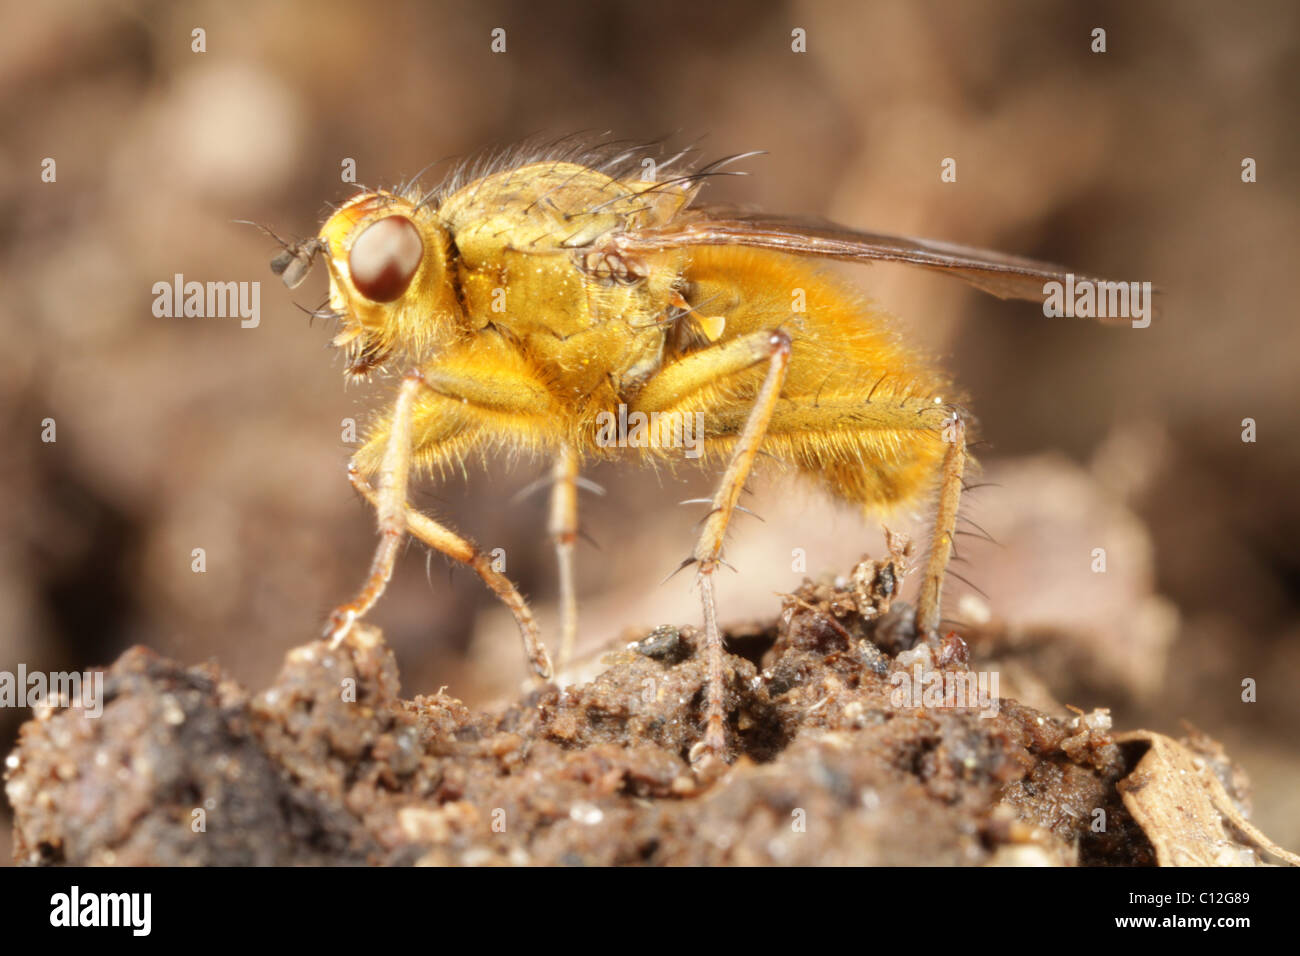 Golden dung fly, Scathophaga stercoraria. Banque D'Images